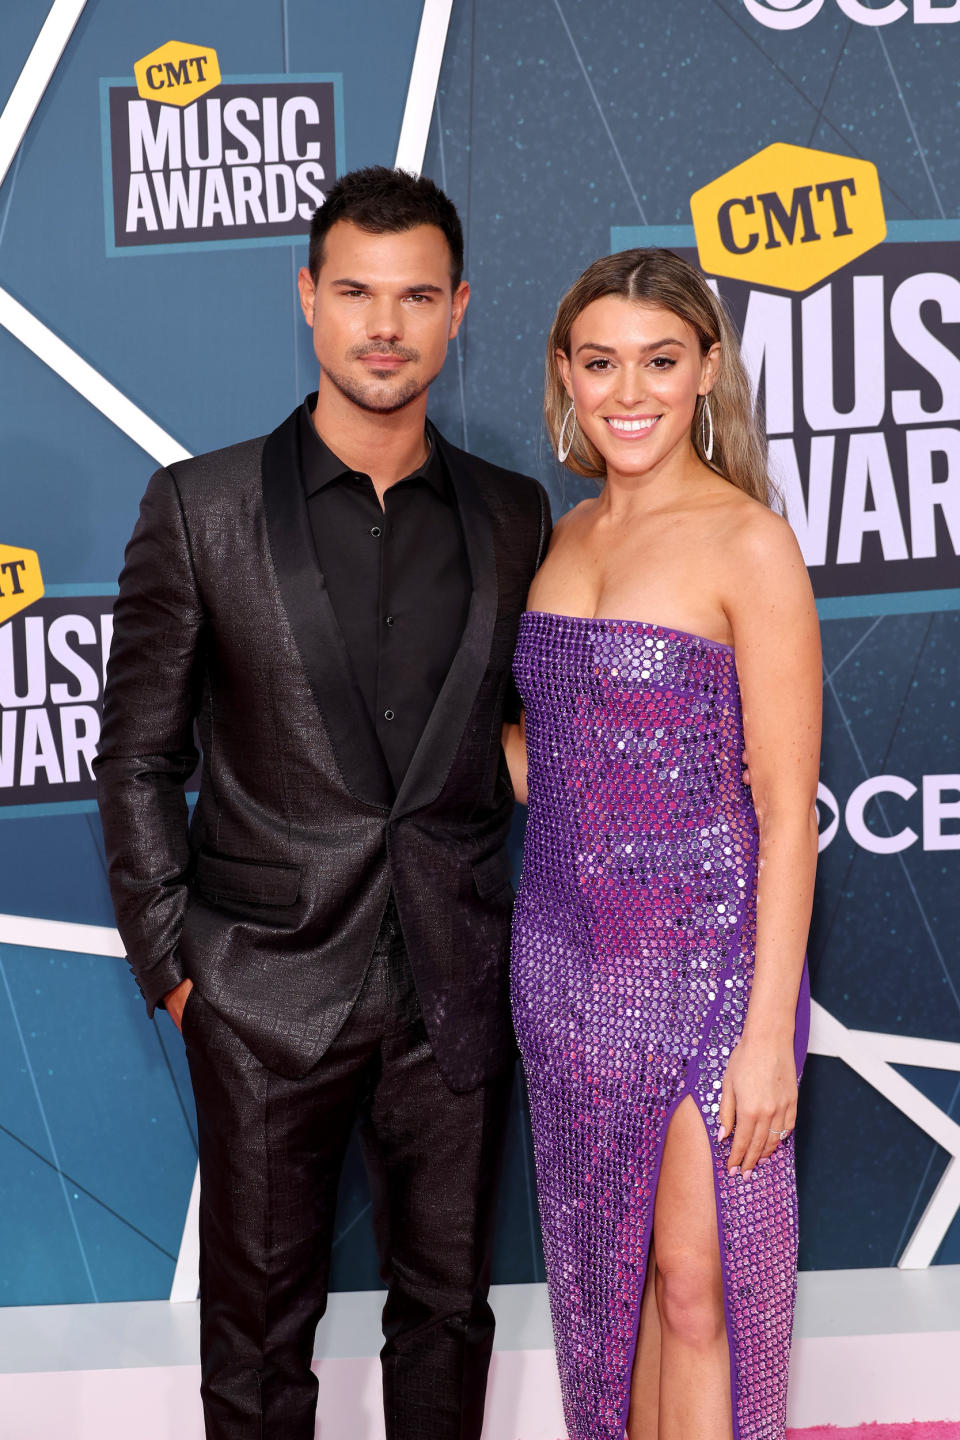 The couple at the 2022 CMT Music Awards on April 11, 2022 in Nashville, Tennessee. (Mike Coppola / Getty Images)